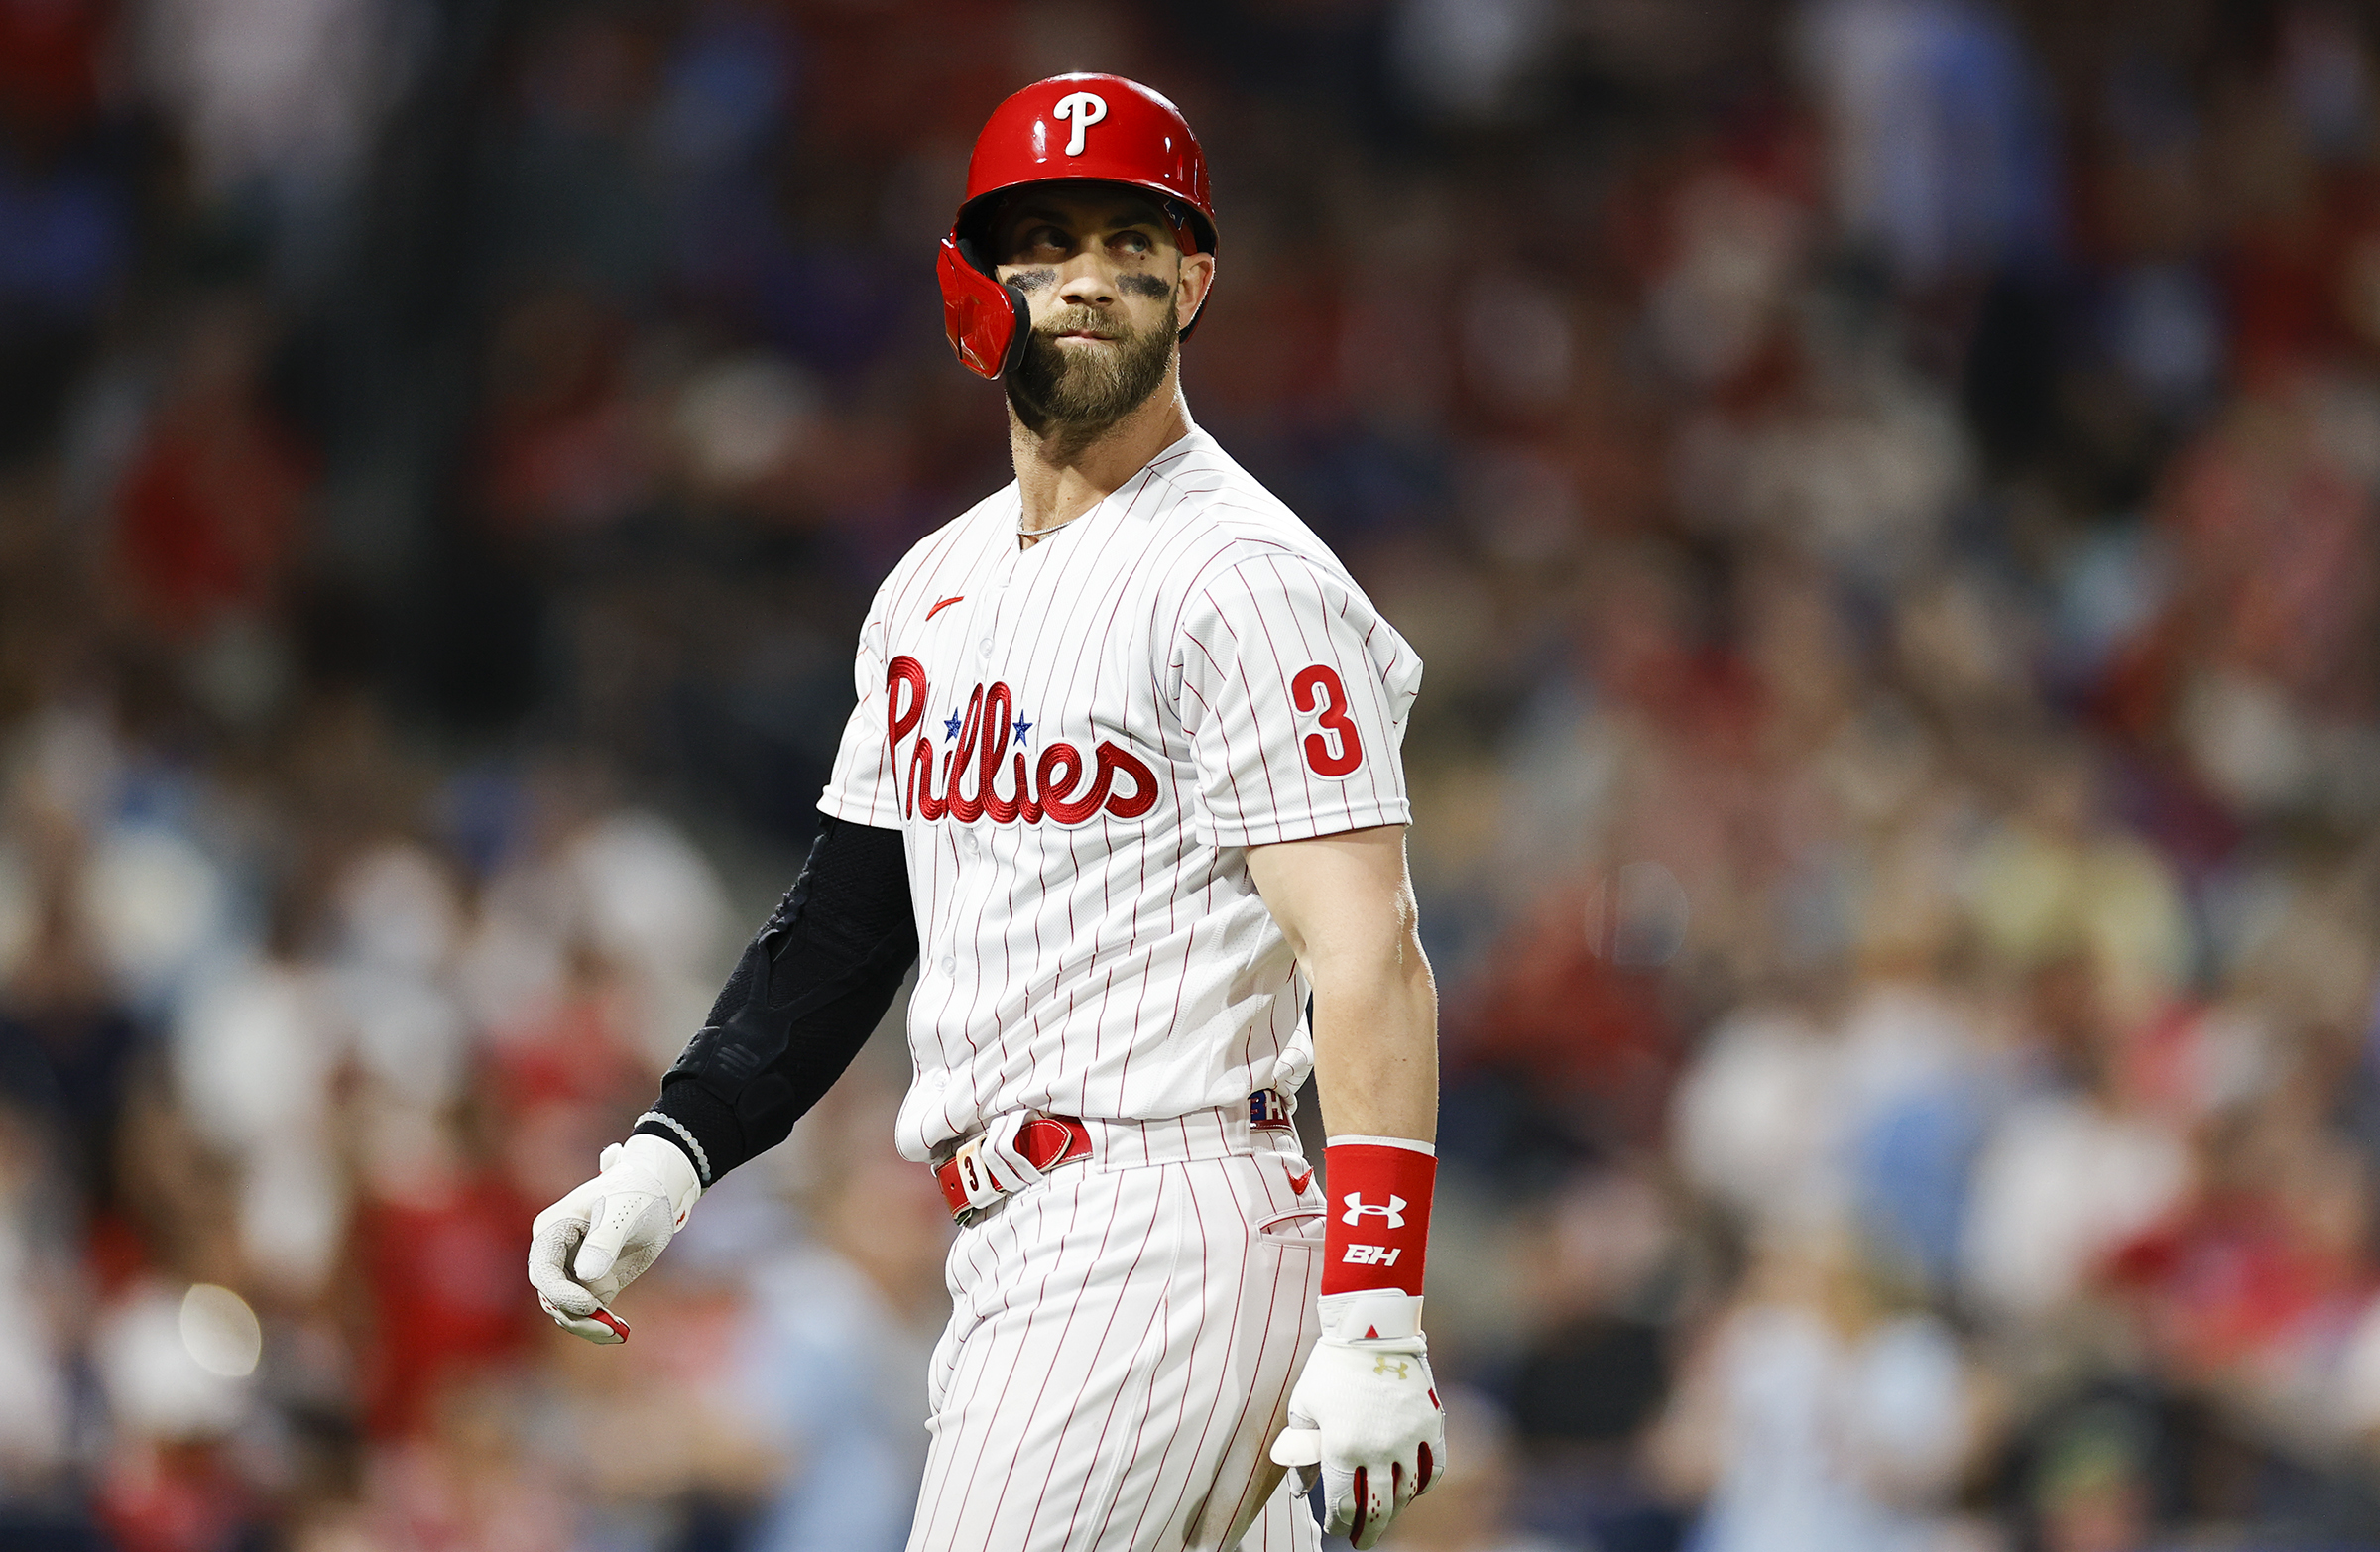 Is Bryce Harper vaccinated? Here's what we know about the potential MVP